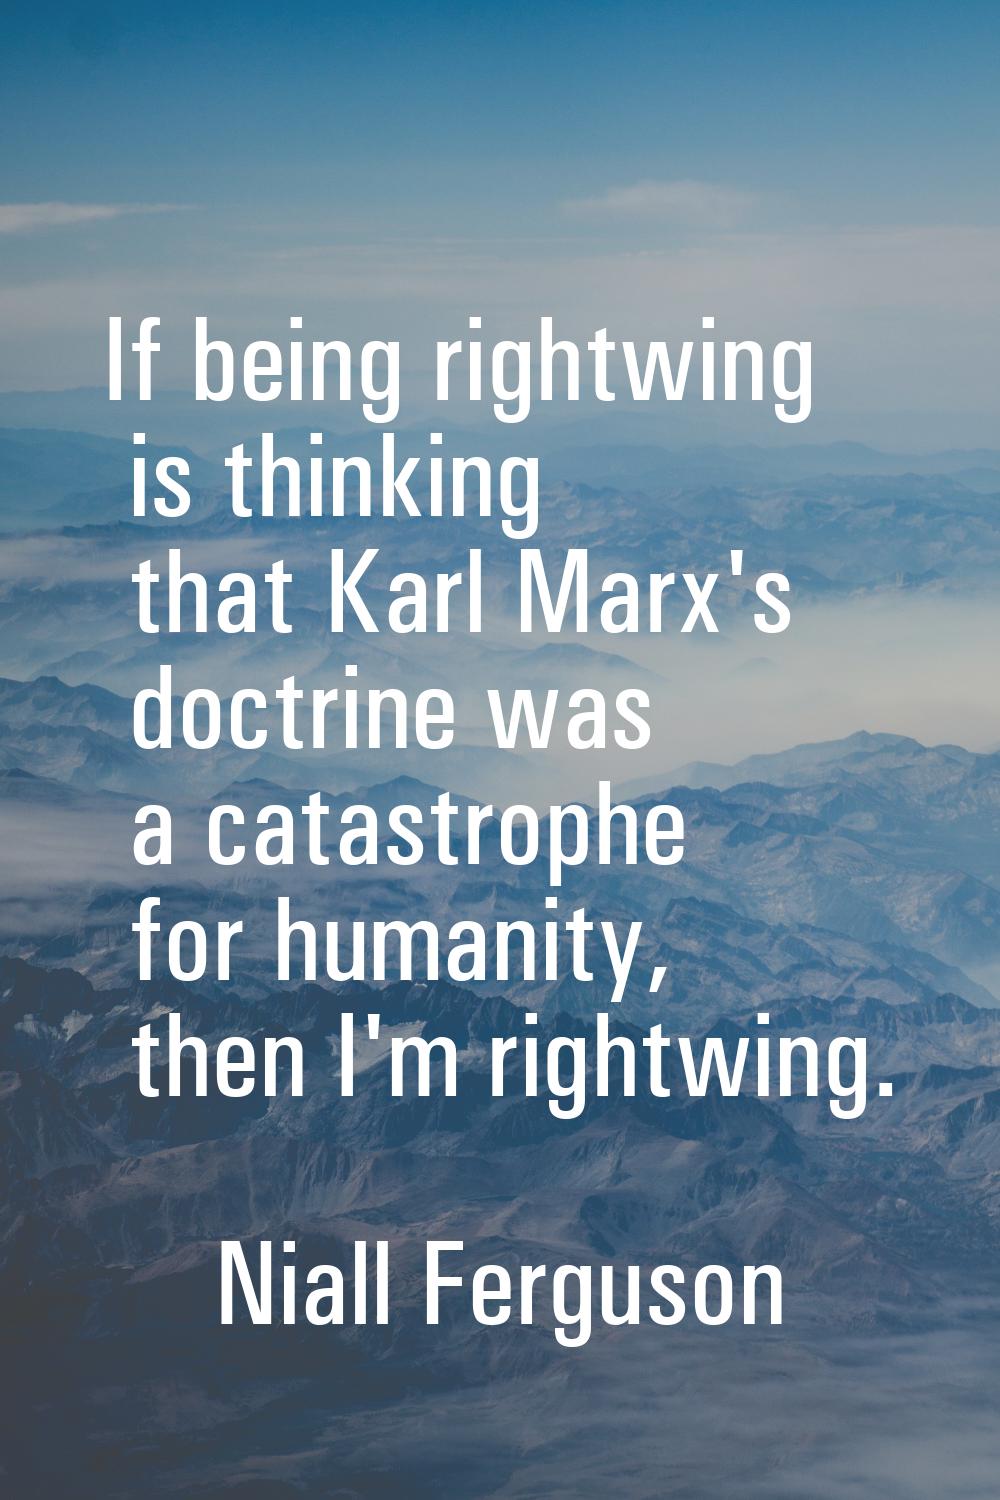 If being rightwing is thinking that Karl Marx's doctrine was a catastrophe for humanity, then I'm r